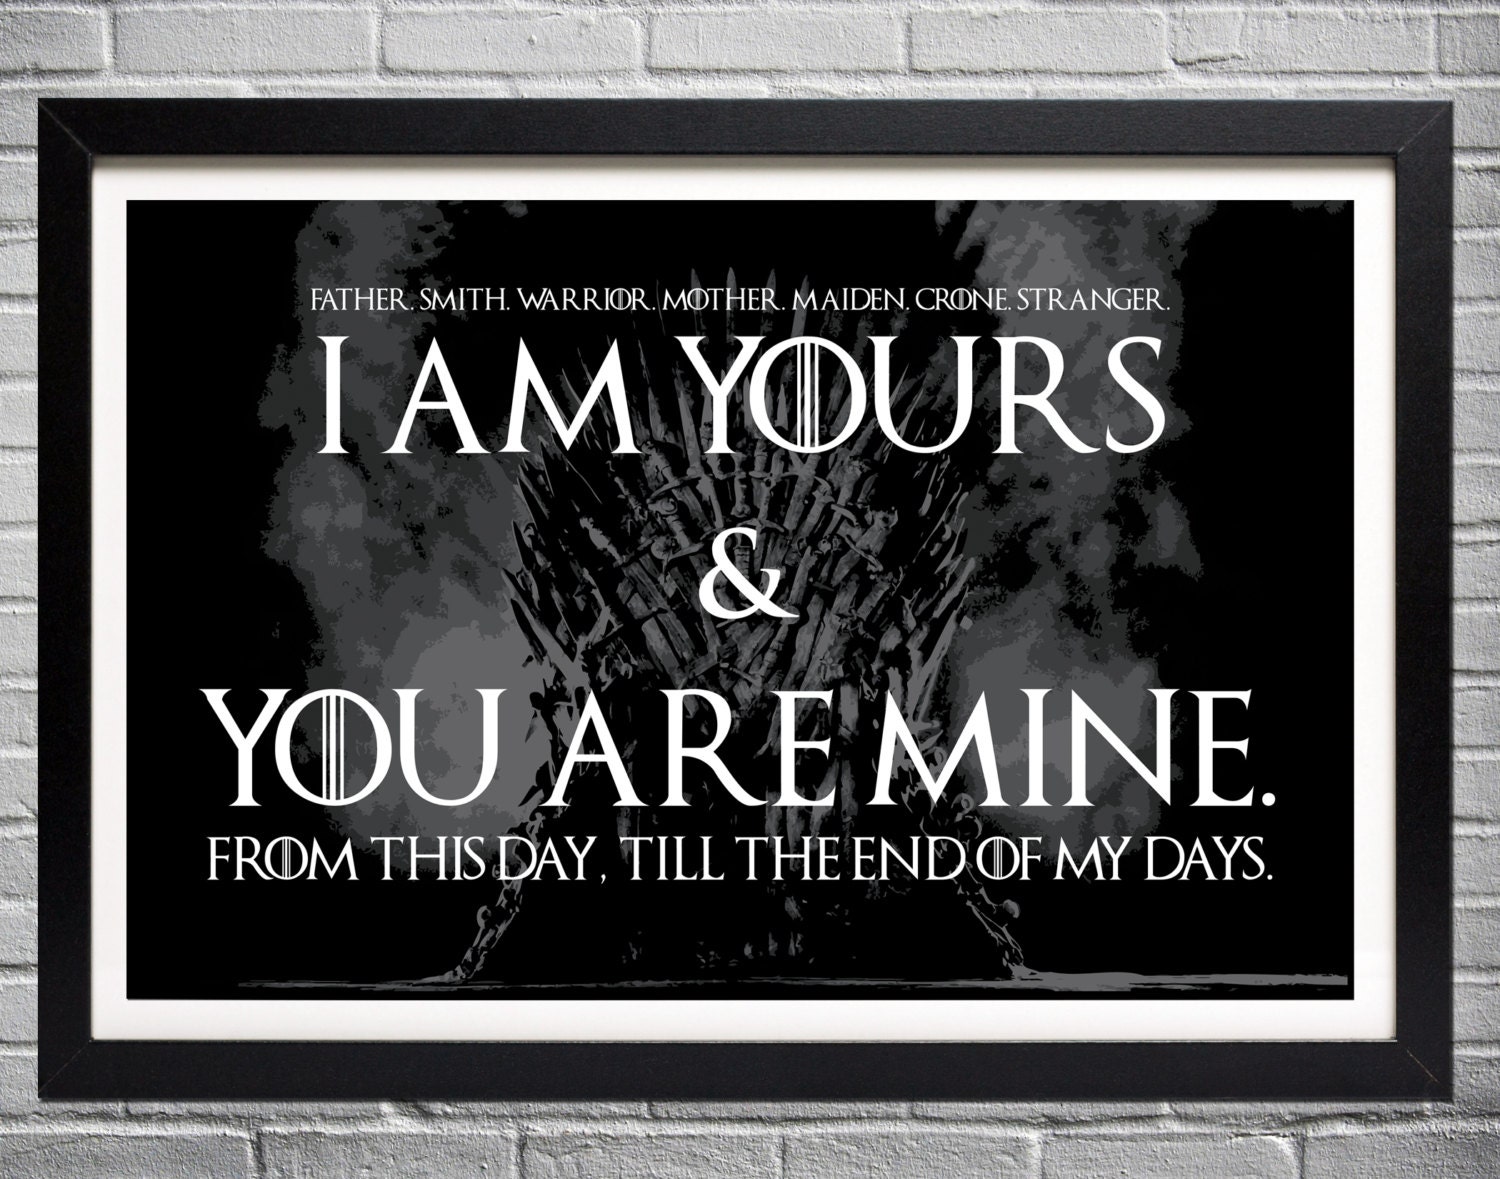 Wedding Vows In Game Of Thrones